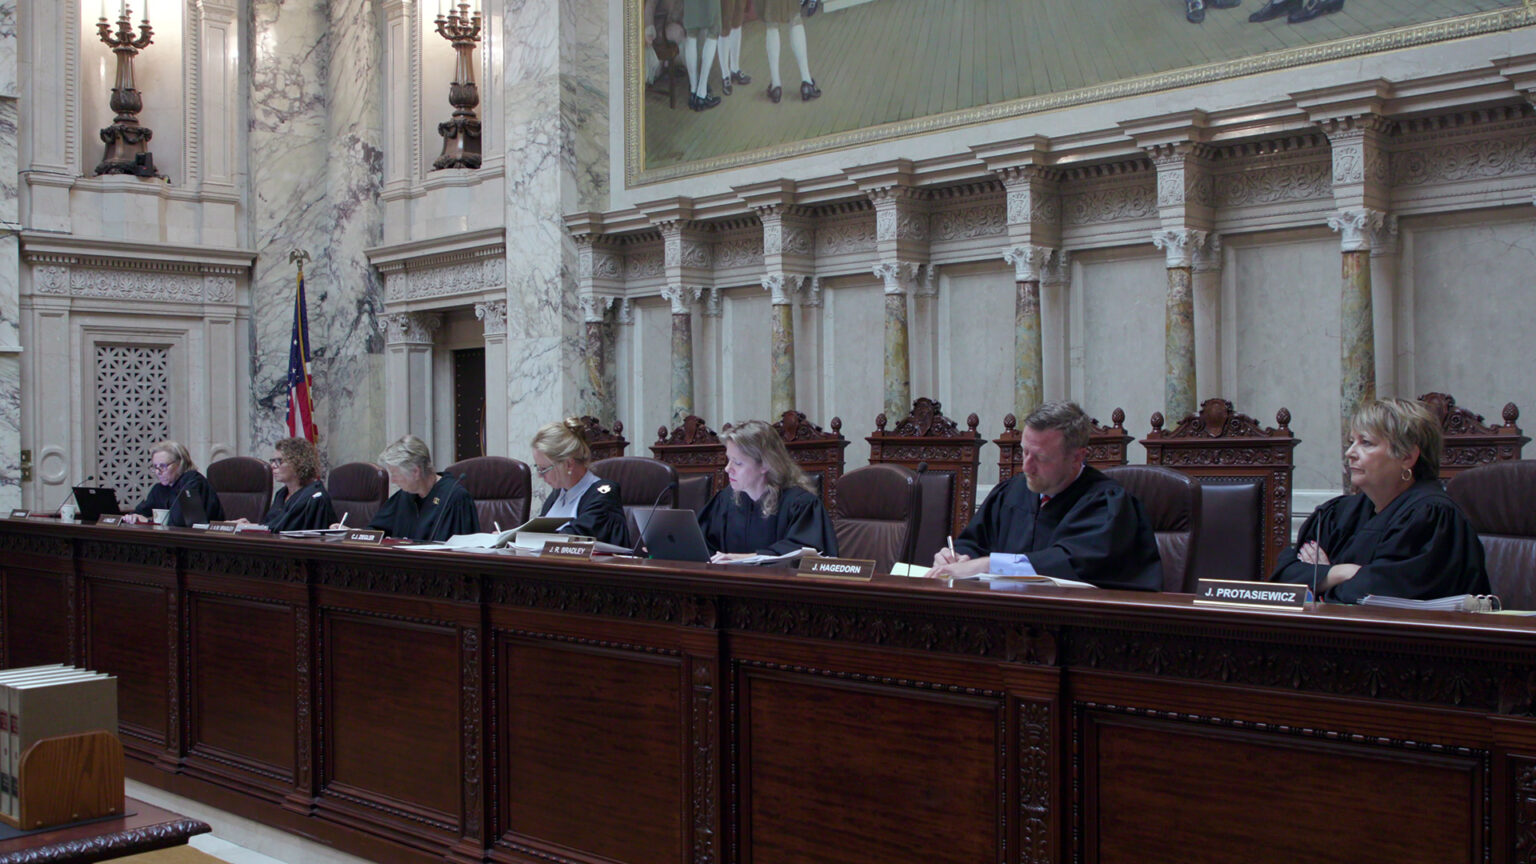 From left to right, Jill Karofsky, Rebecca Dallet, Ann Walsh Bradley Annette Ziegler, Rebecca Bradley, Brian Hagedorn and Janet Protasiewicz sit at a judicial dais in a row of high-backed leather chairs behind them, with another row of high-backed wood and leather chairs behind them, in a room with marble masonry, wall-mounted metal light fixtures, a U.S. flag and a large painting.